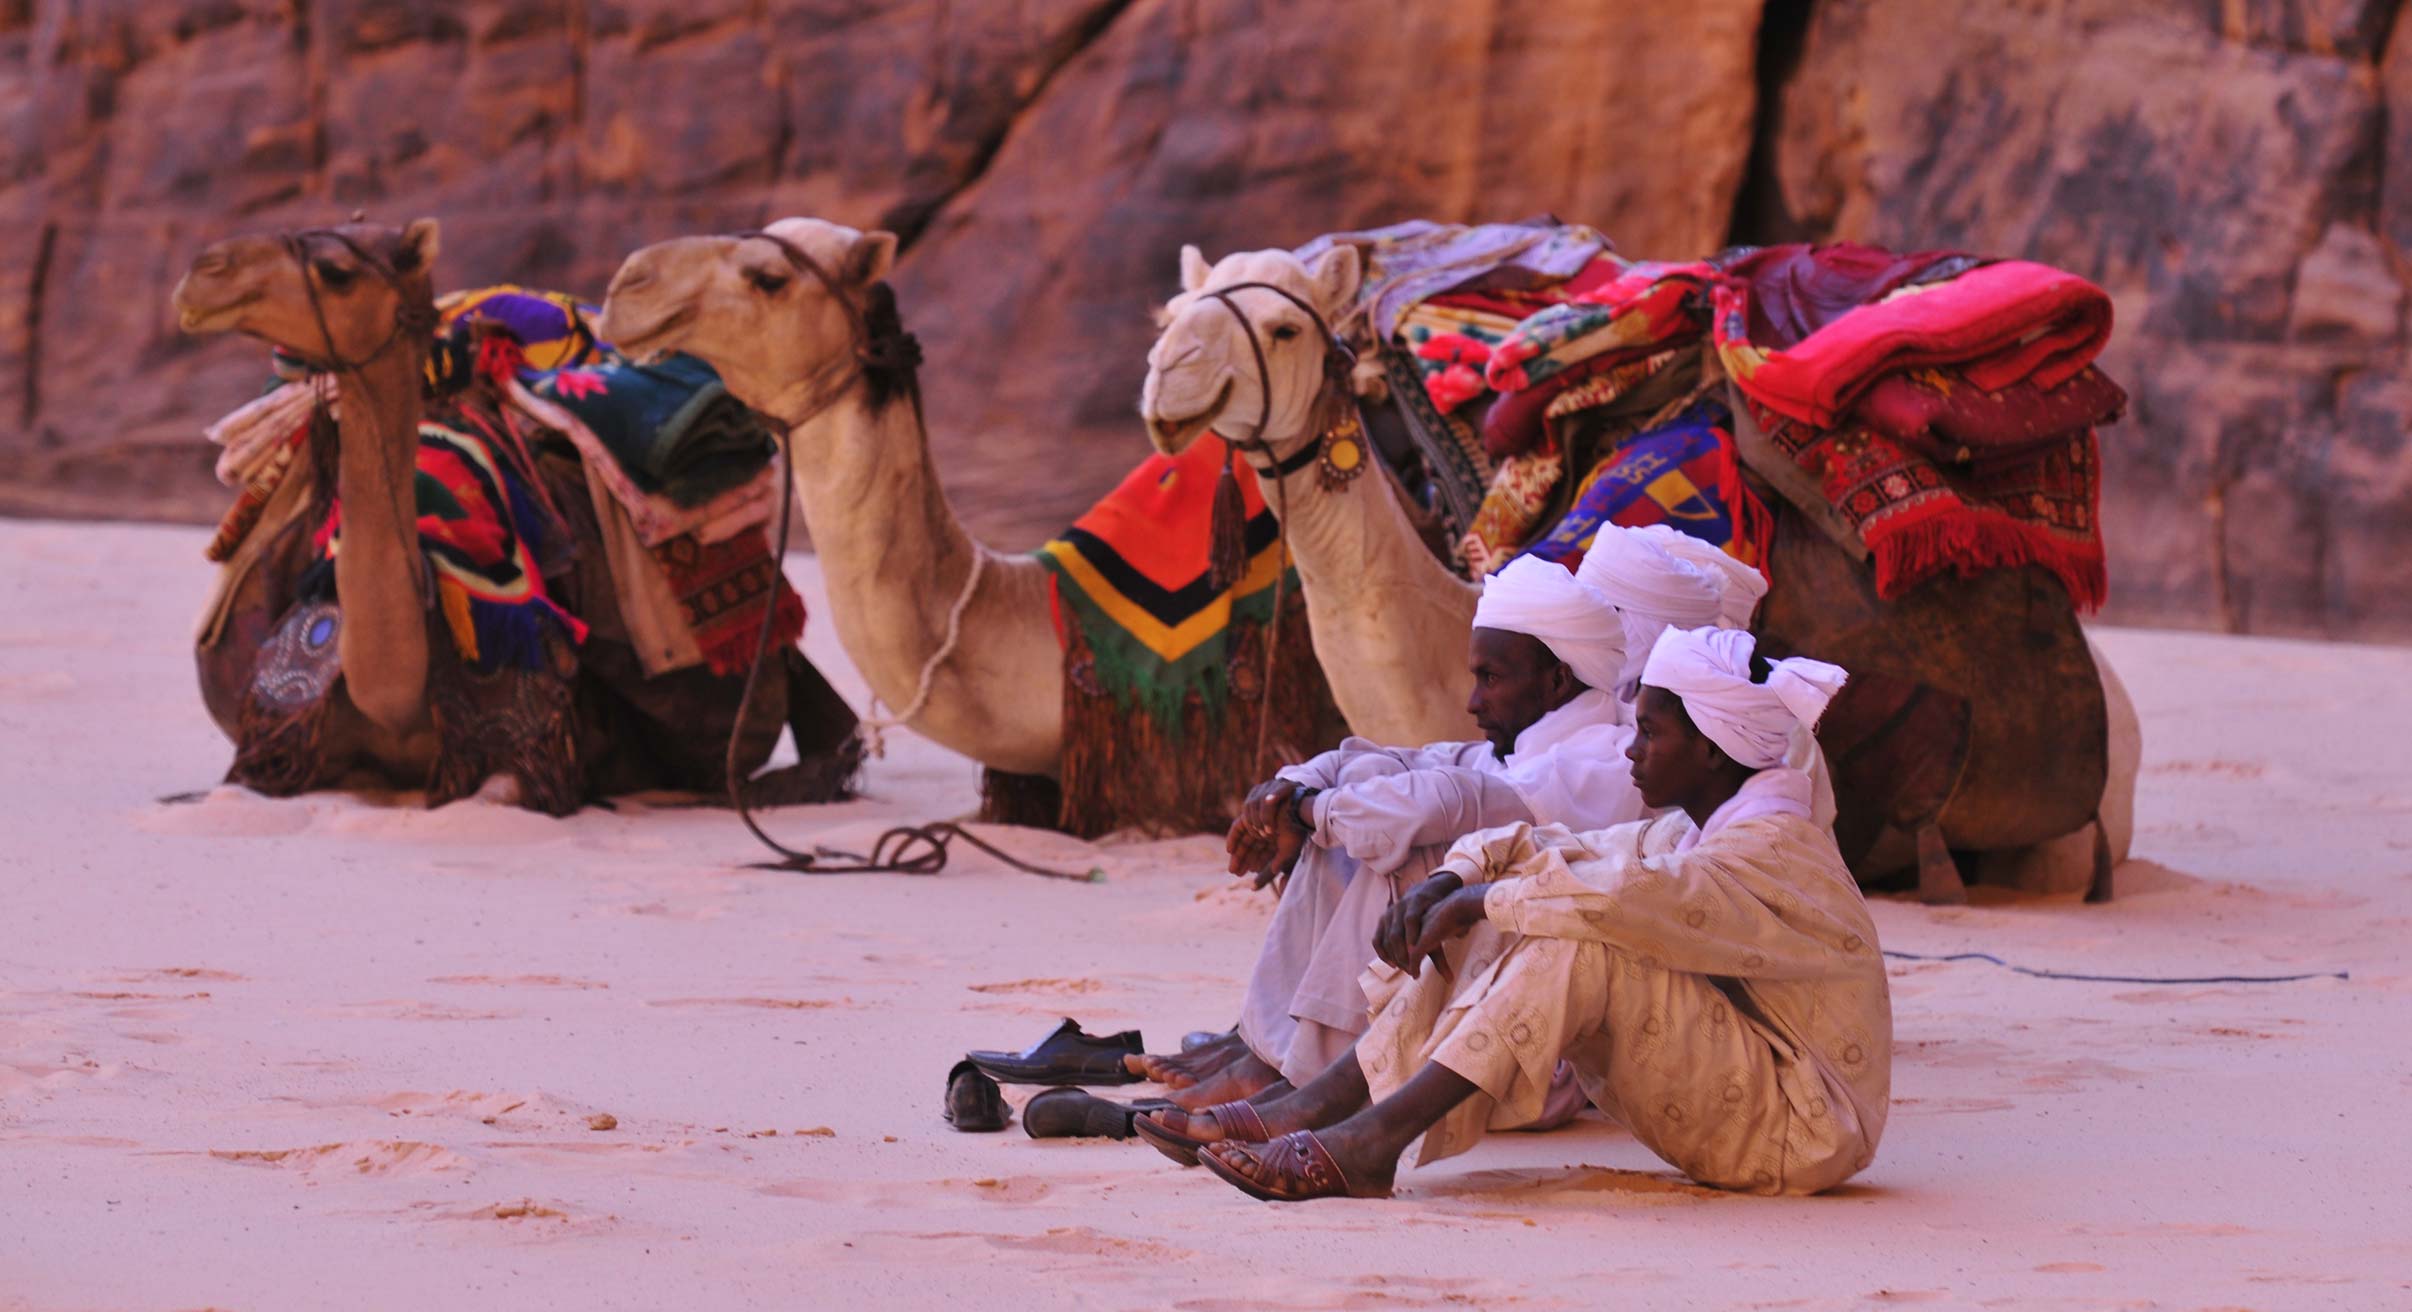 Nomads and camels in Ennedi Desert in Chad